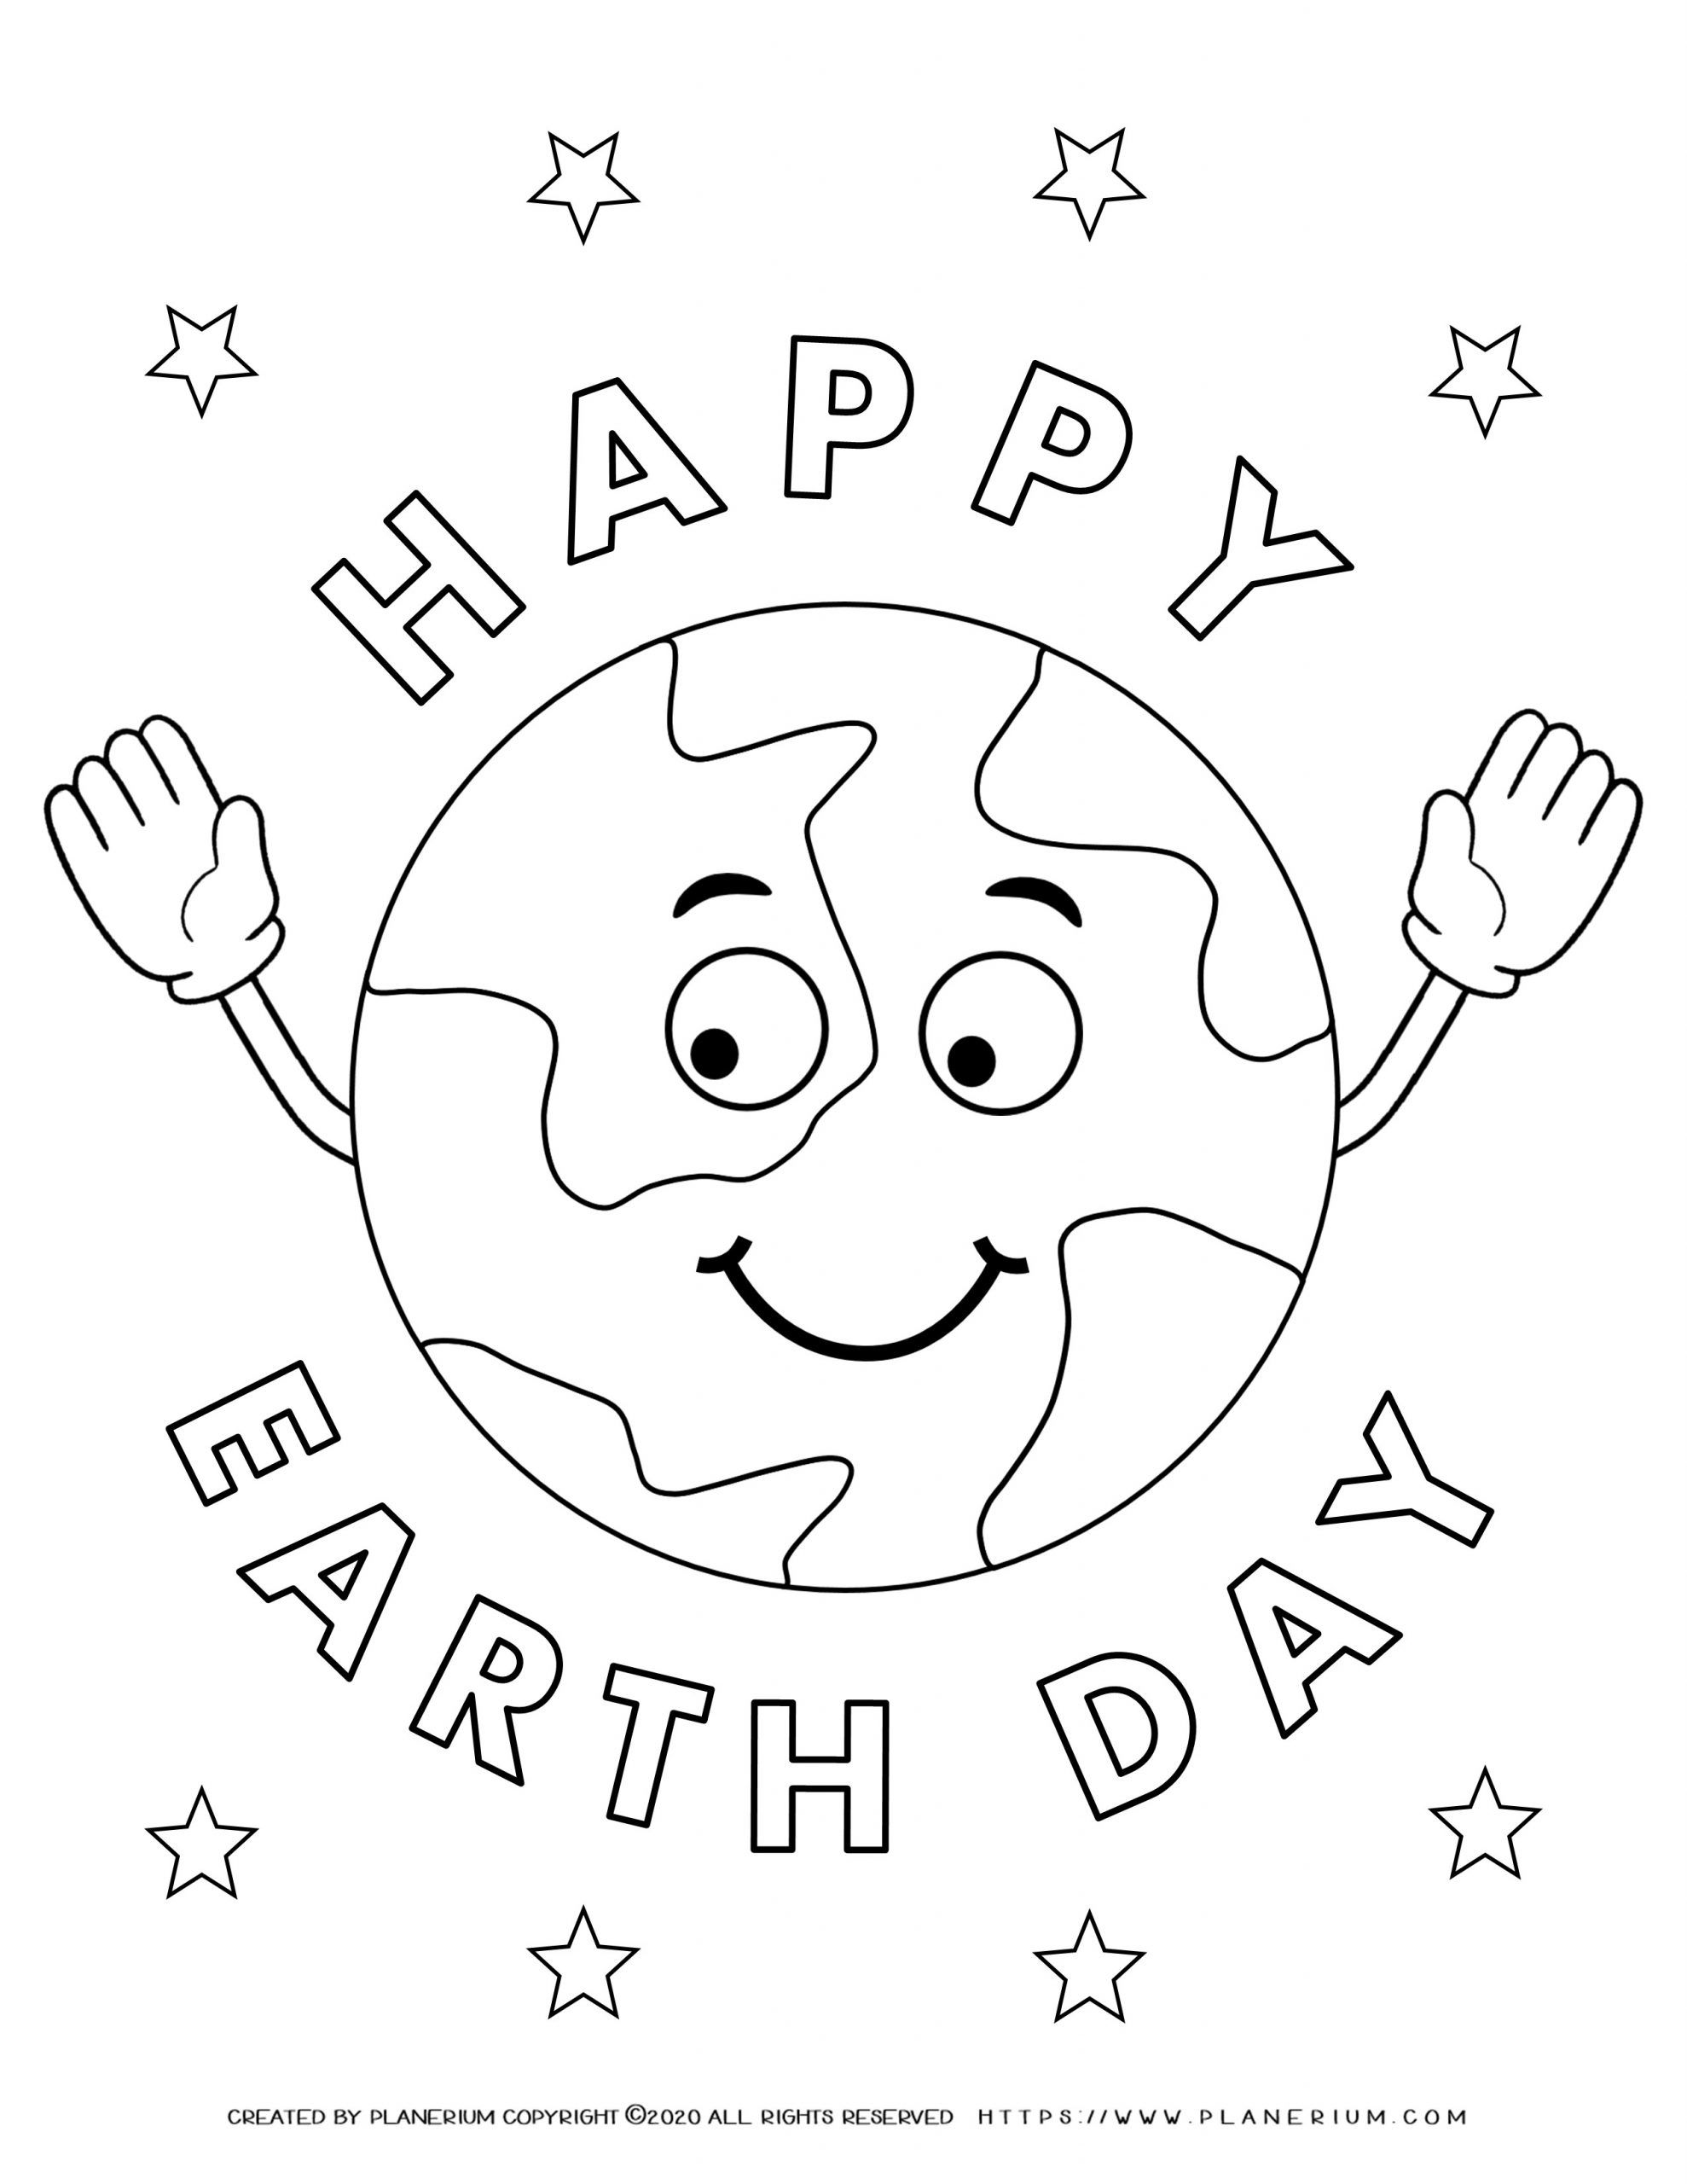 earth-day-printable-coloring-pages